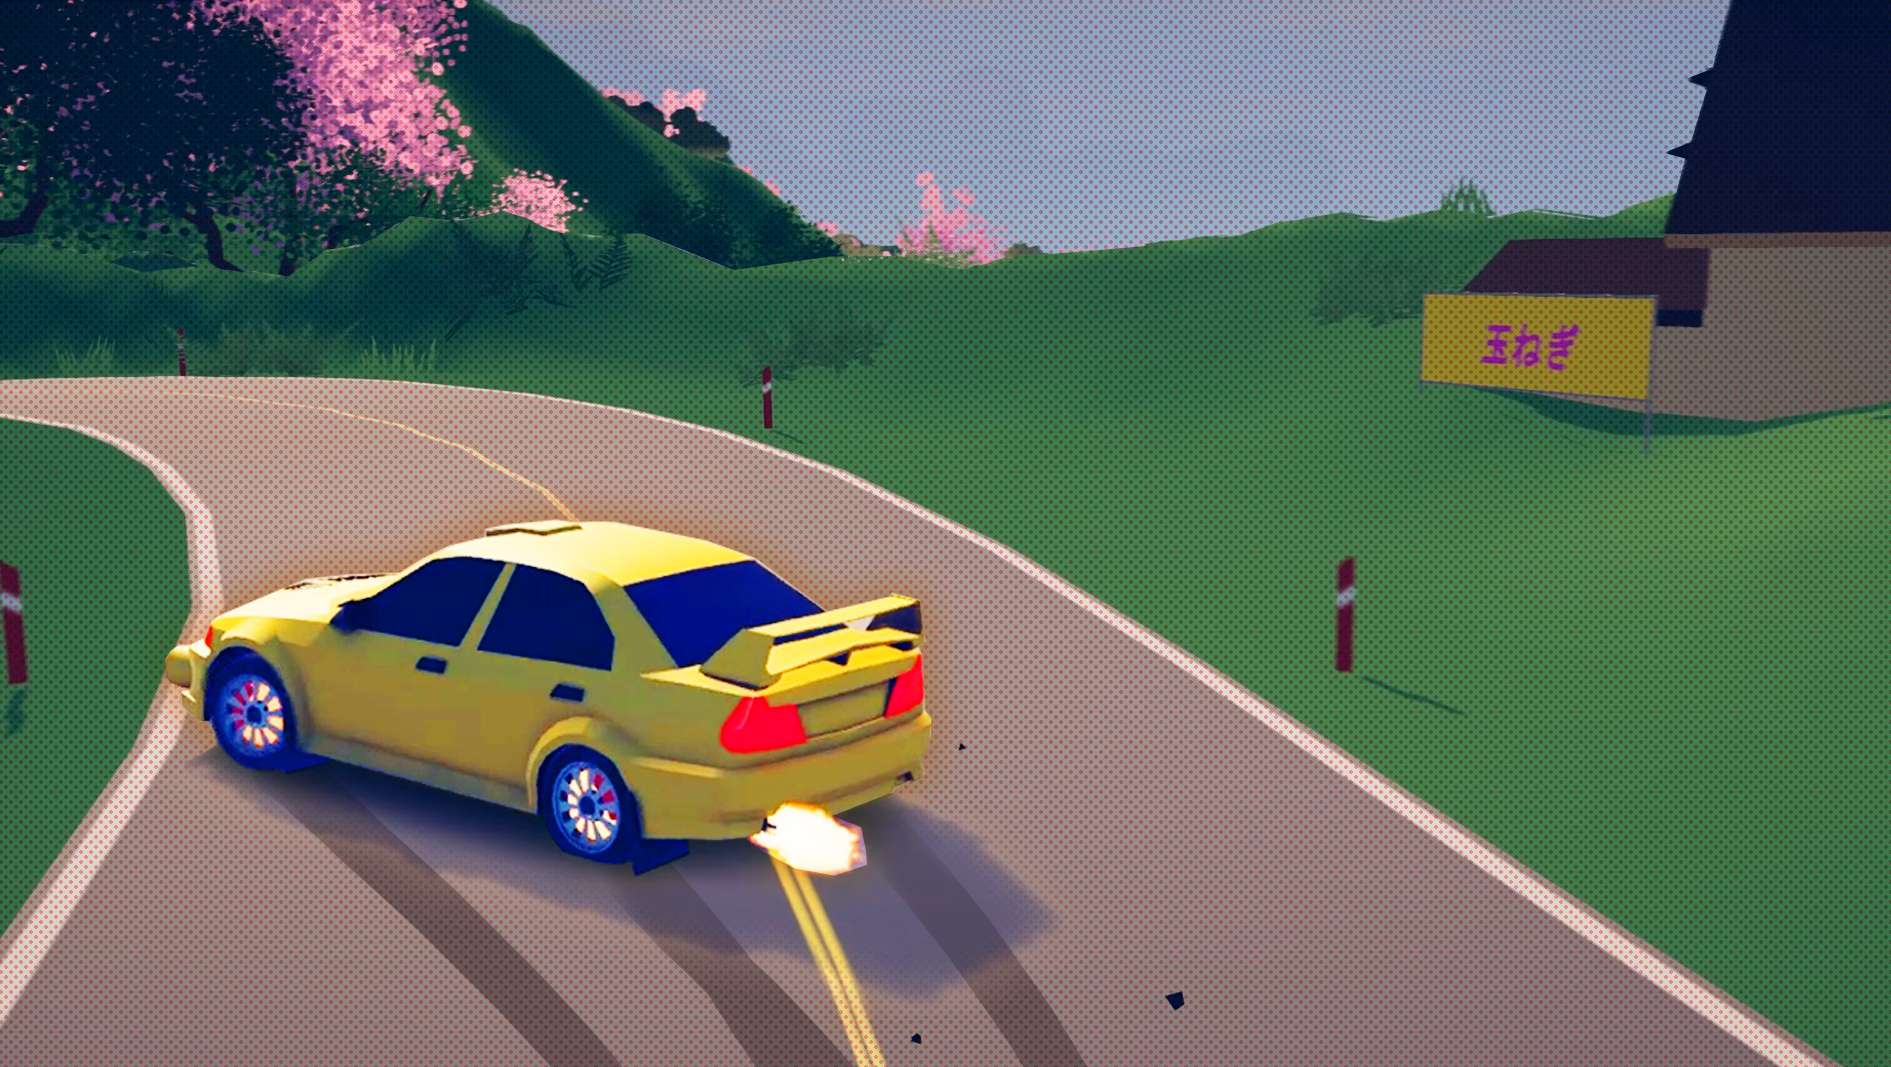 A bright yellow cars drifting from the right to the left in a low poly video Gaming News, Video Game Reviews, and Game Guides world that looks like a Japanese mountainside, complete with pink cherry blossom trees.